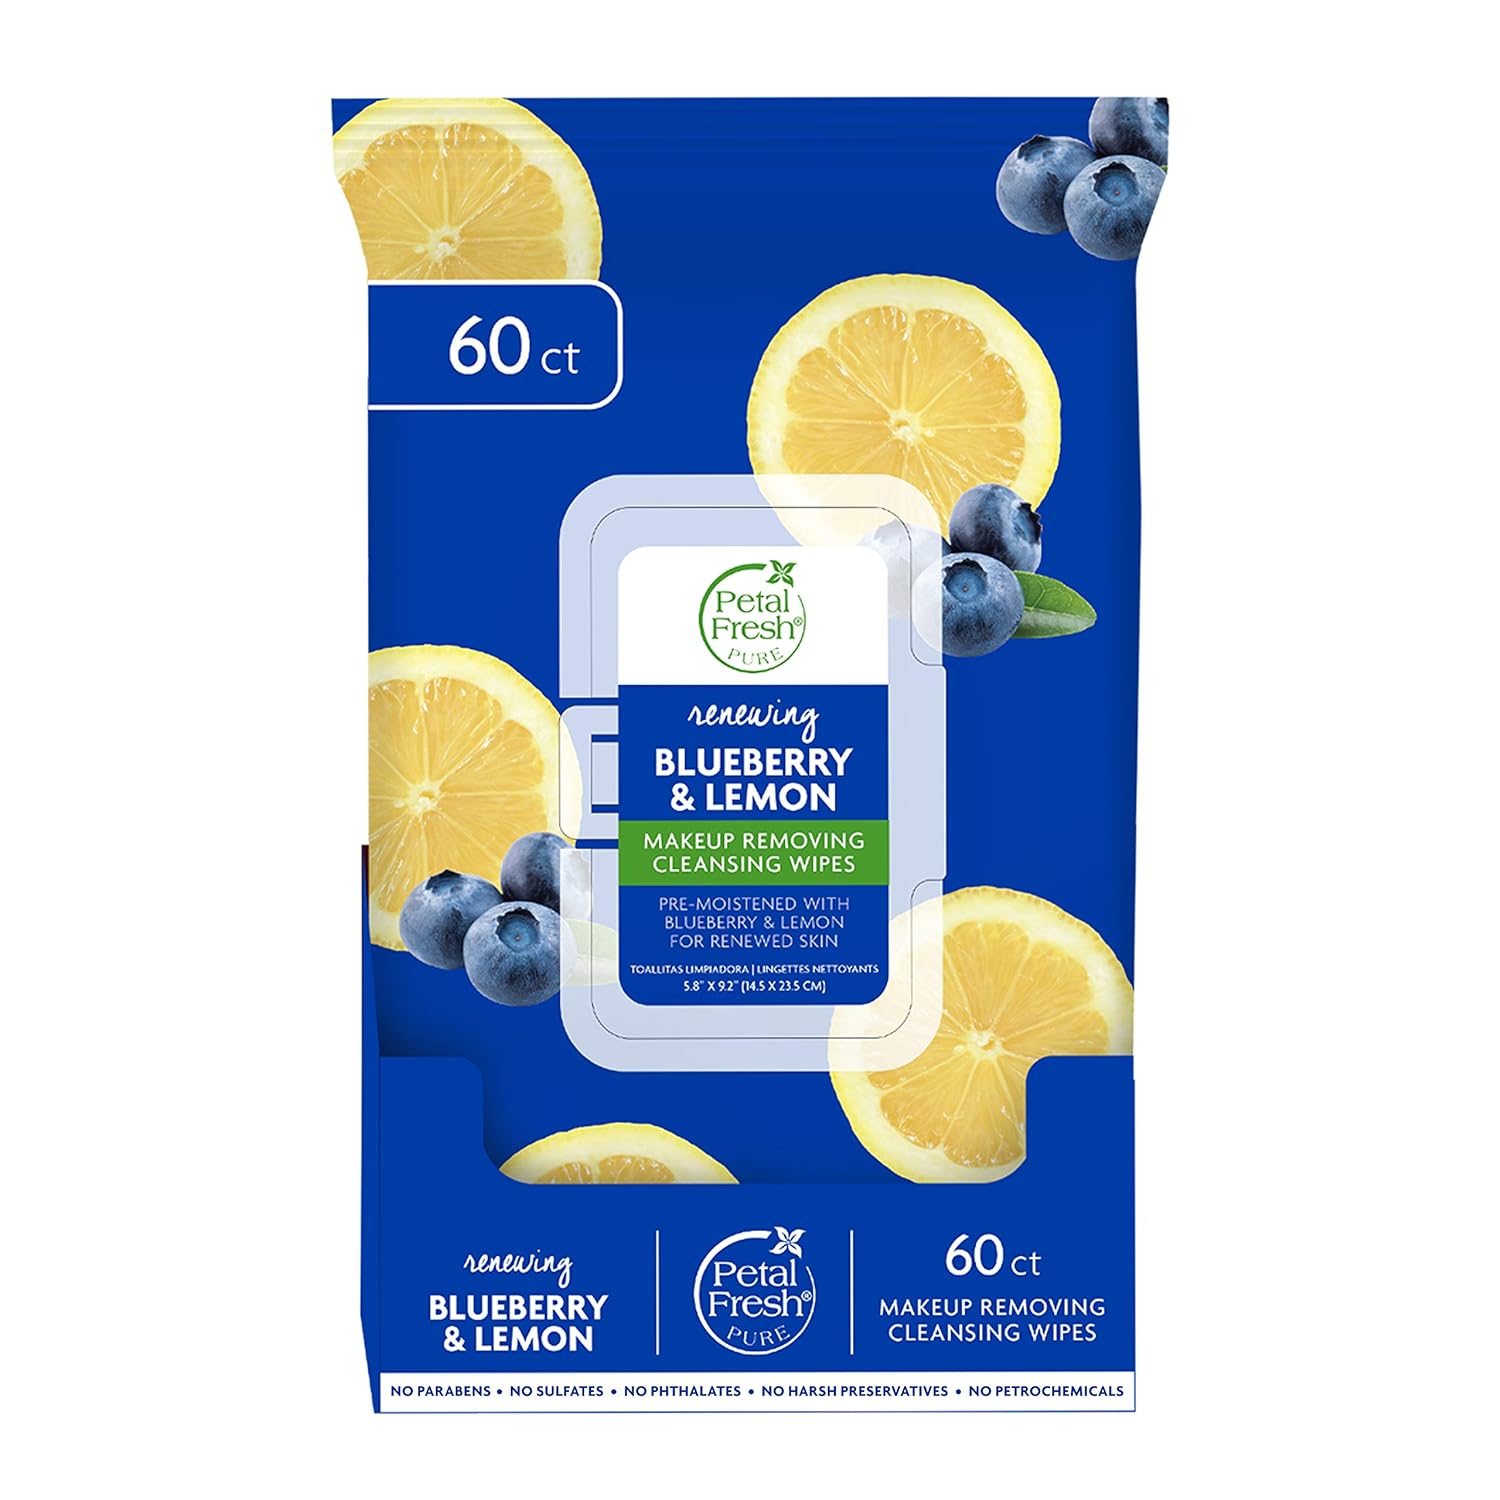 Petal Fresh Renewing Blueberry & Lemon Makeup Removing, Cleansing Towelettes, Gentle Face Wipes, Daily Cleansing, Vegan and Cruelty Free, 60 count